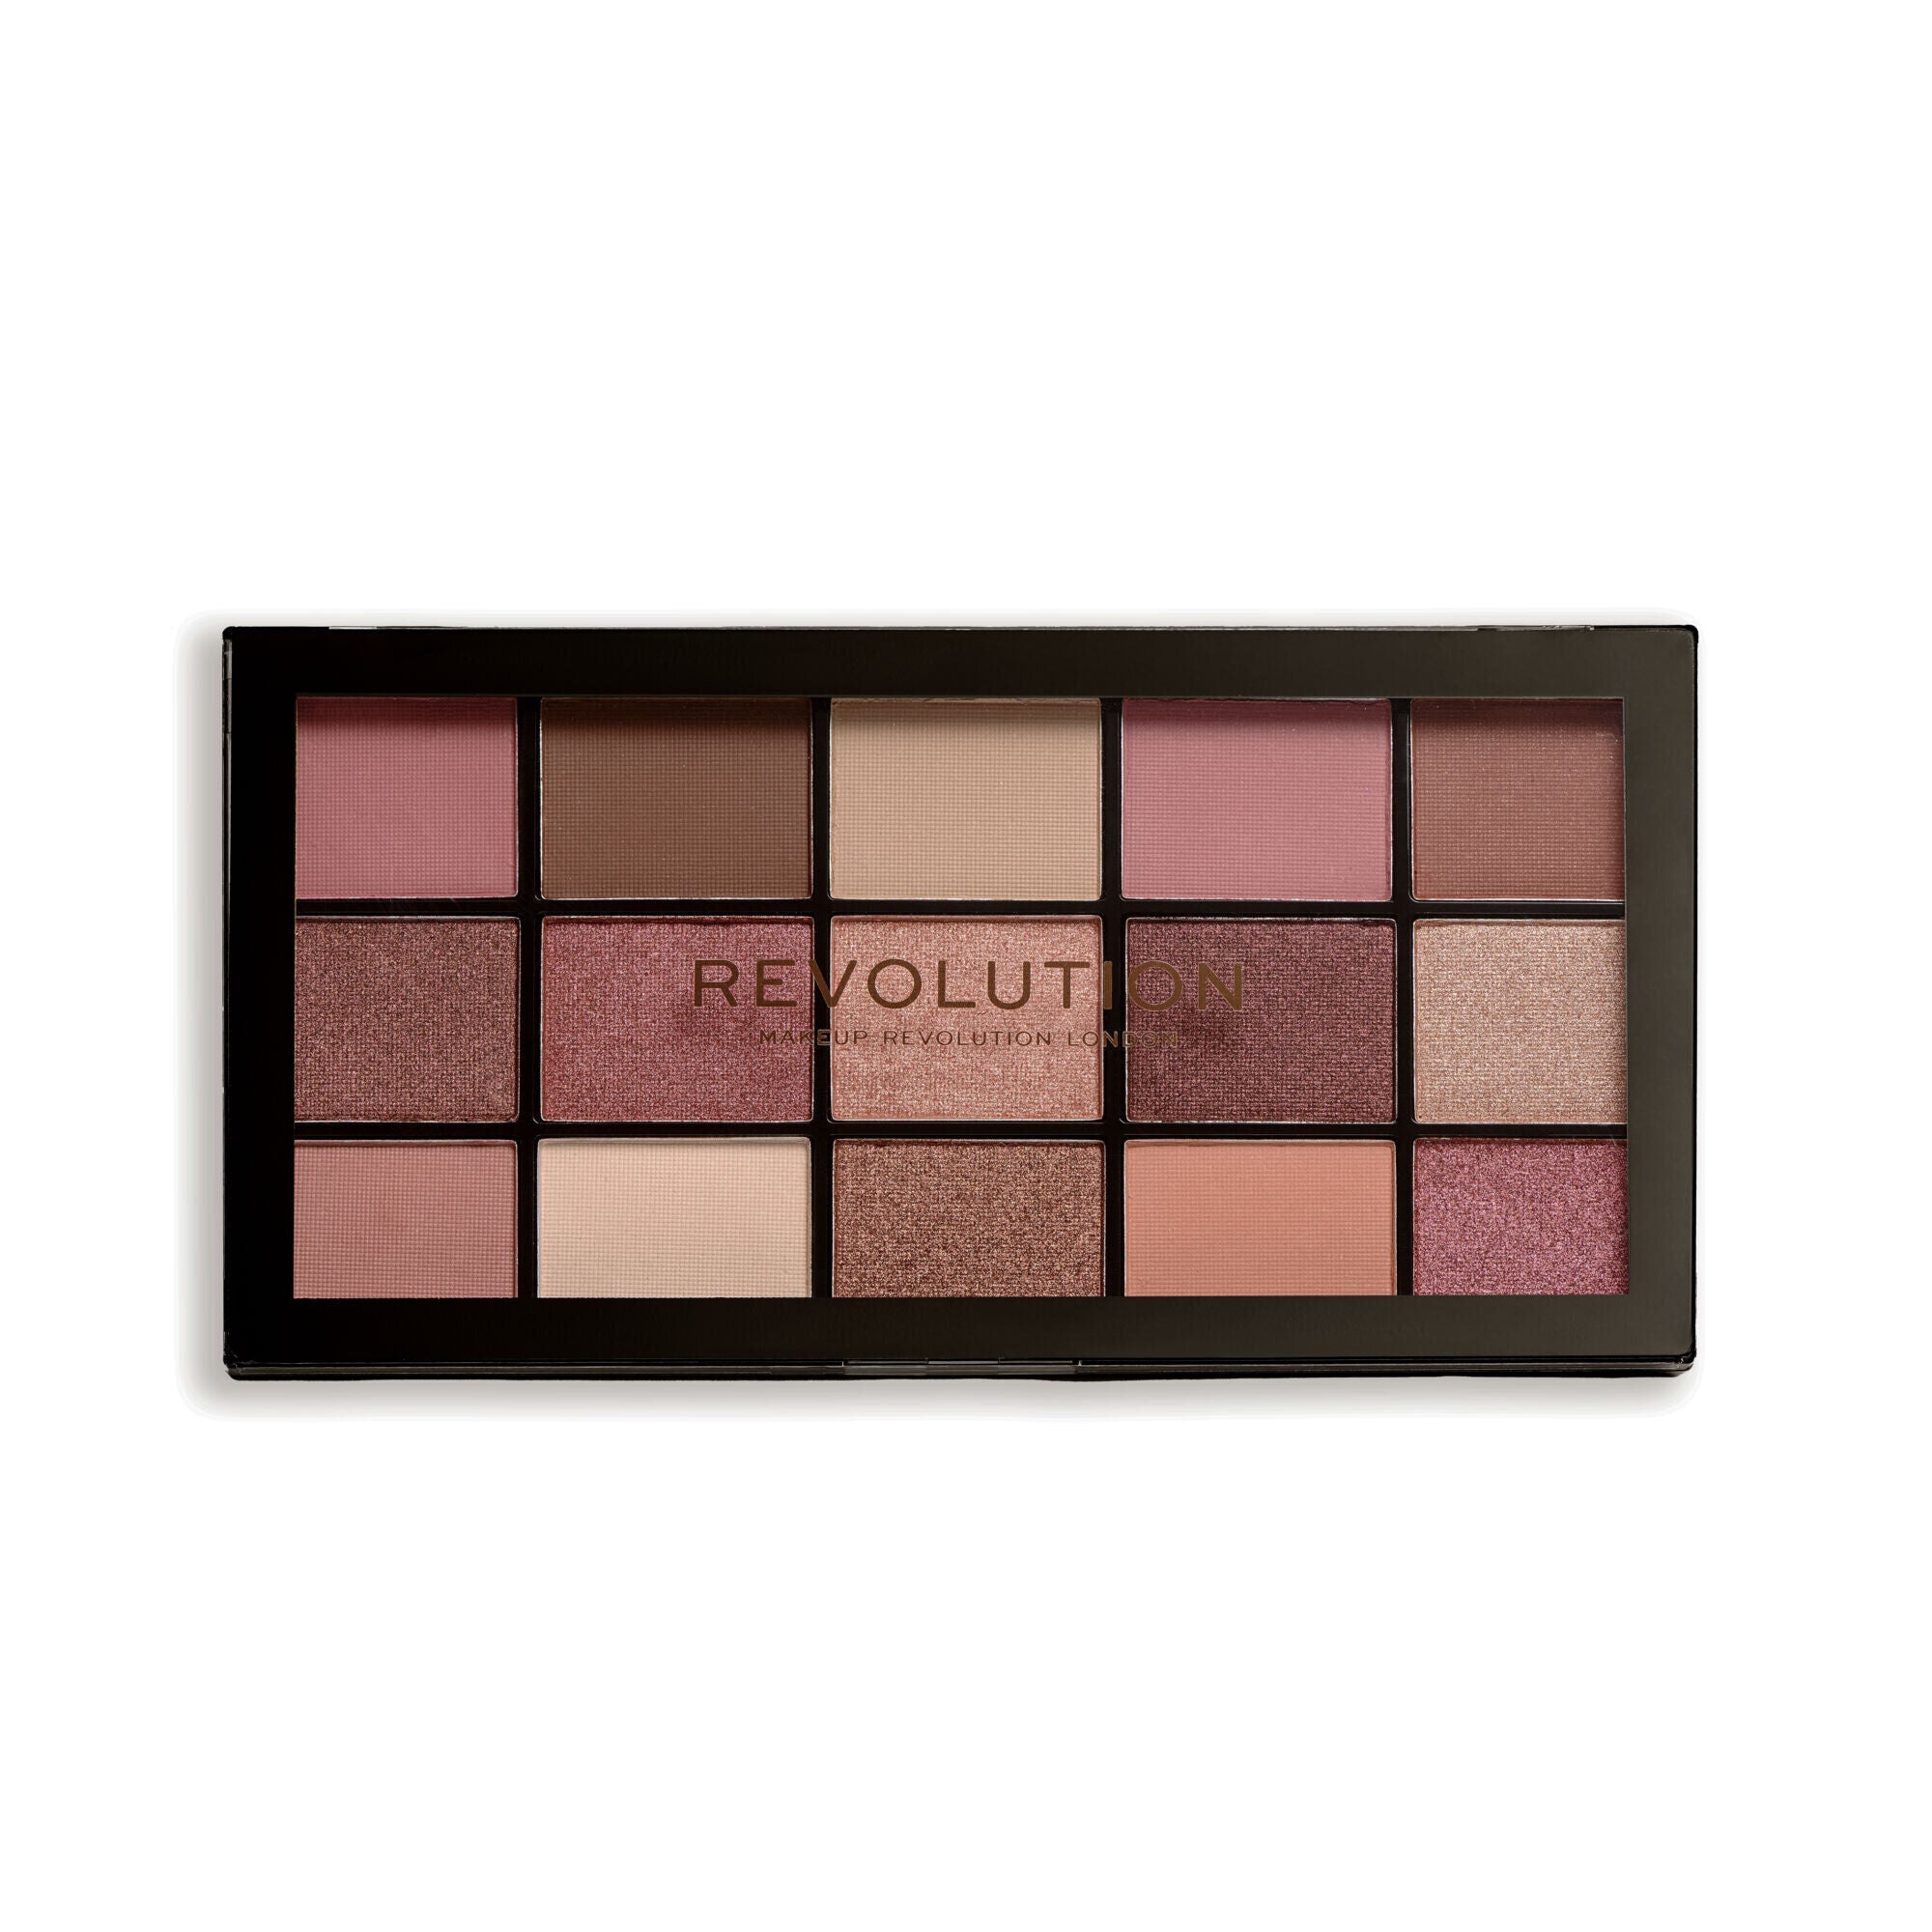 Reloaded Provocative eyeshadow palette